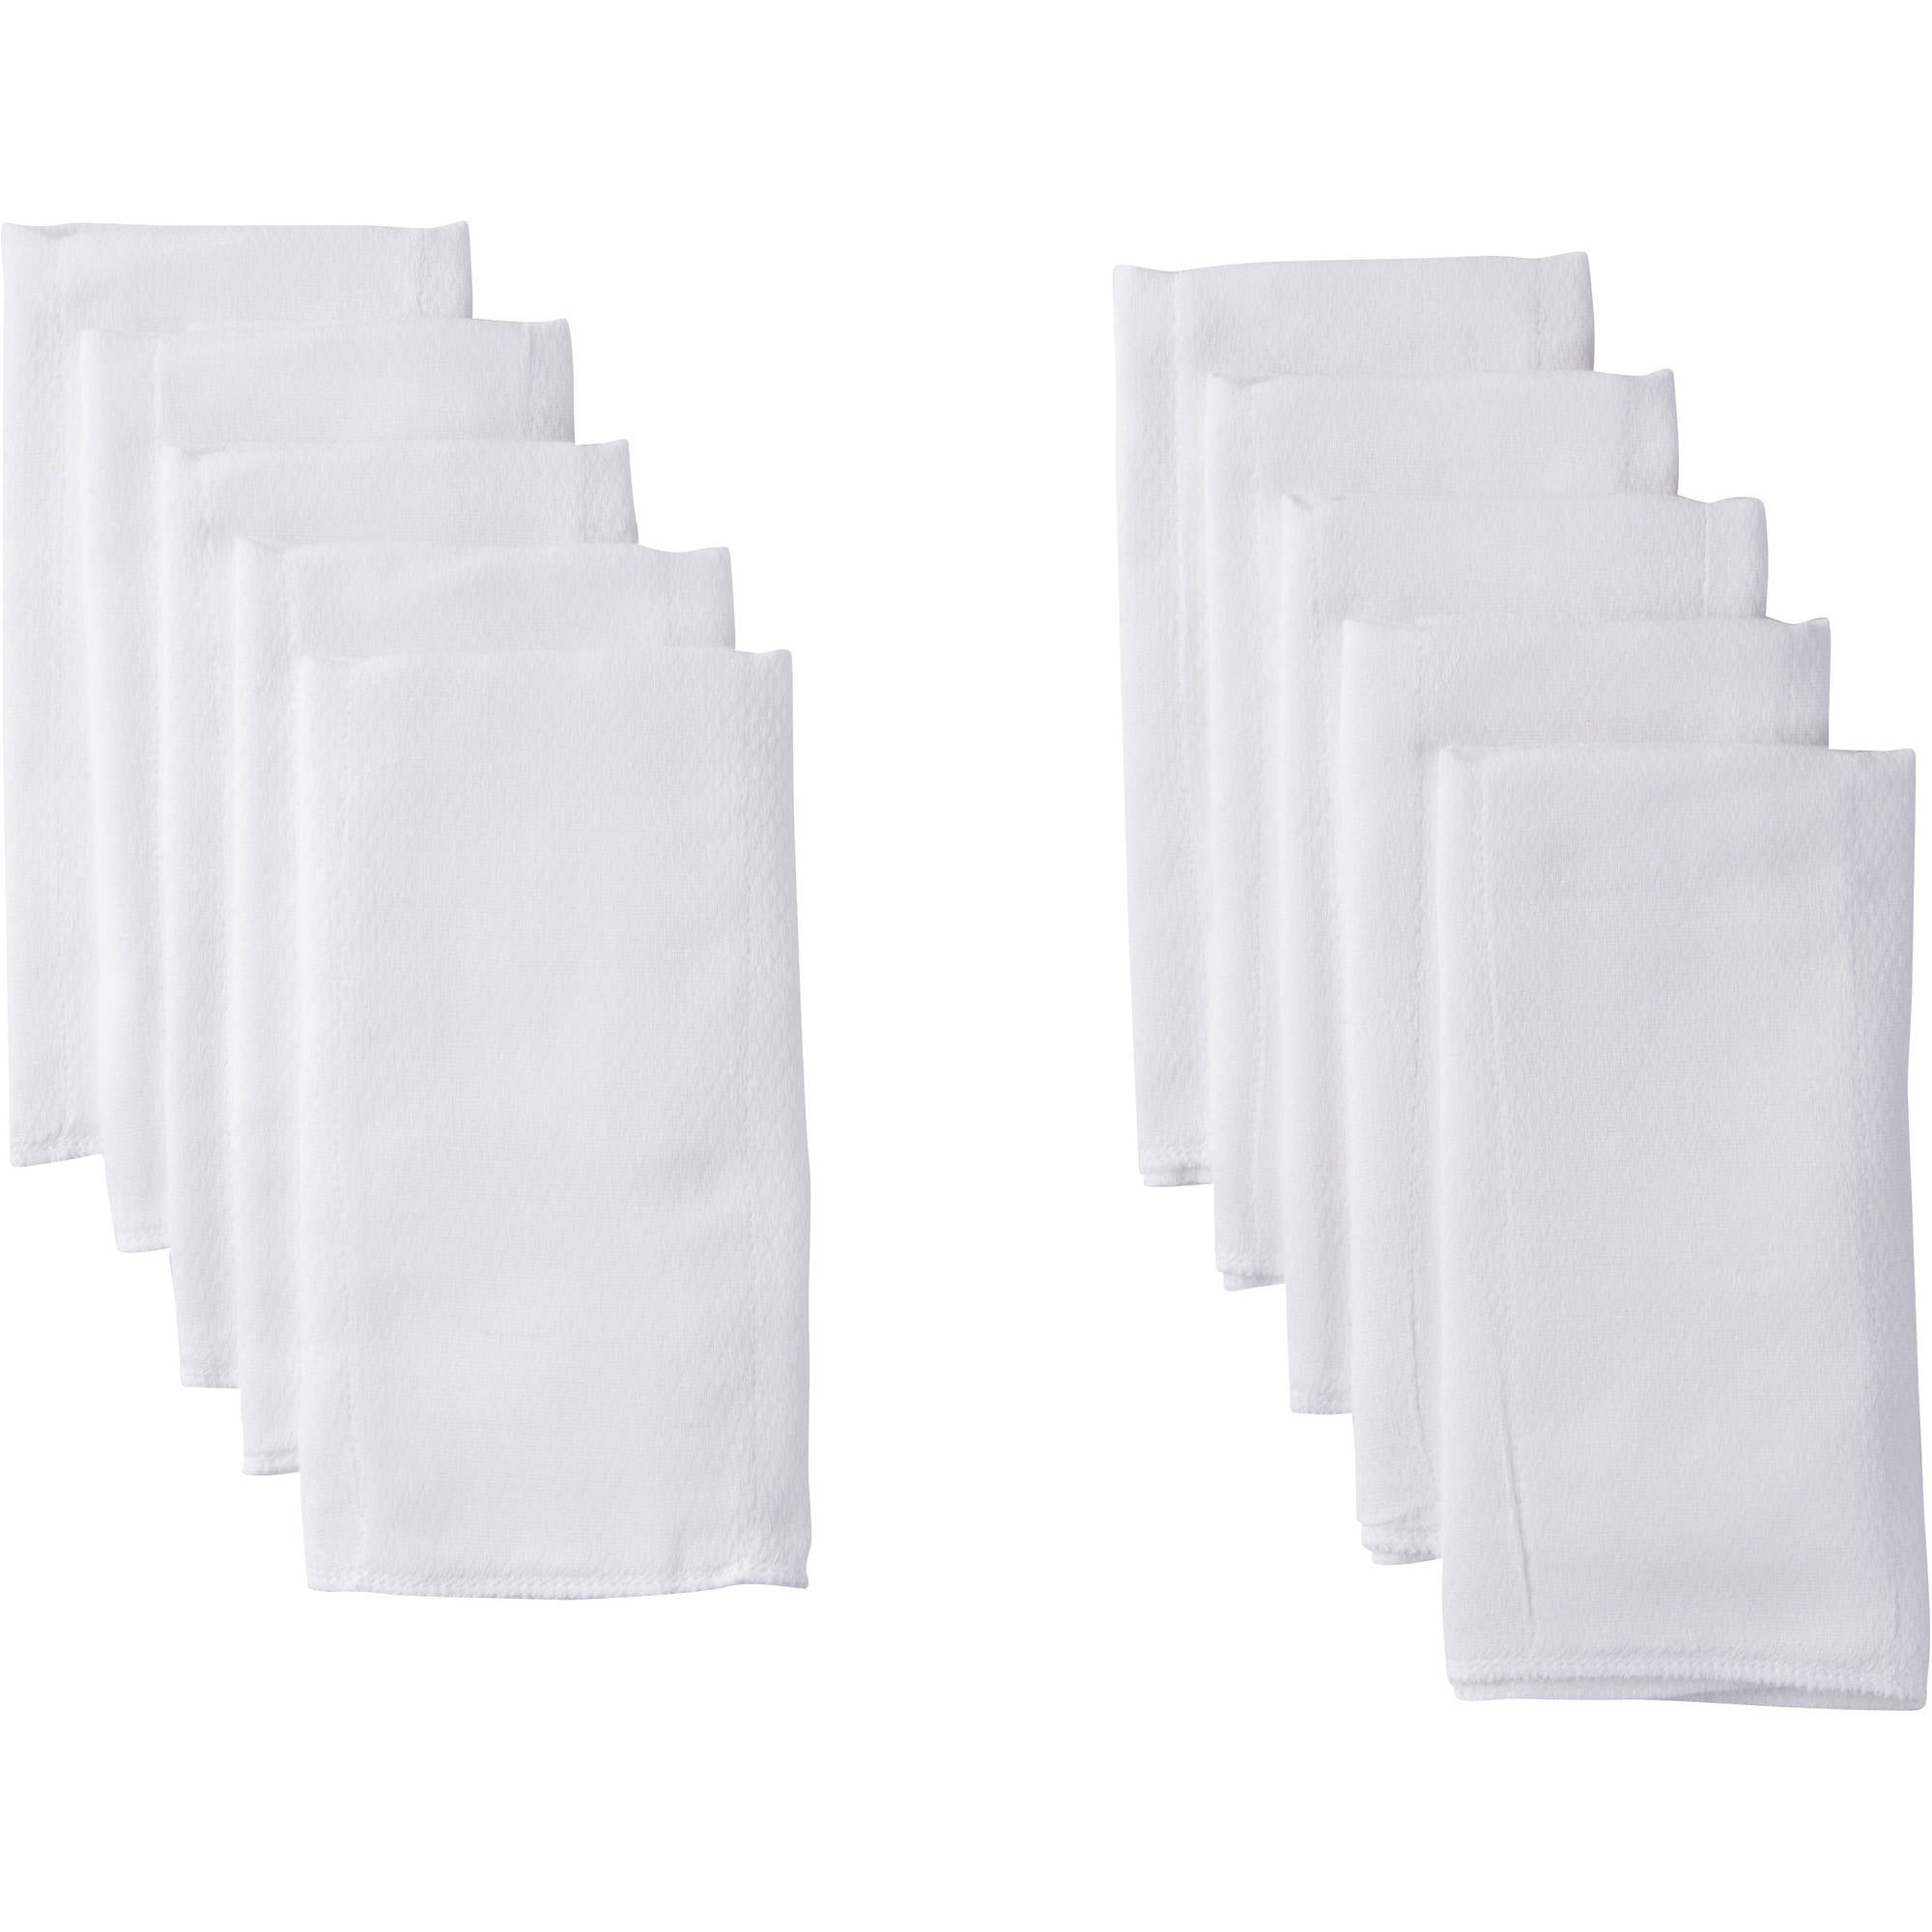 Reusable Cloth Napkin Baby Shower Gifts Ideas Eco Friendly Game On Cloth Baby Wipes Starter Kit Set of 3 Dozen Wipes Re Usable Cloth Wipes 